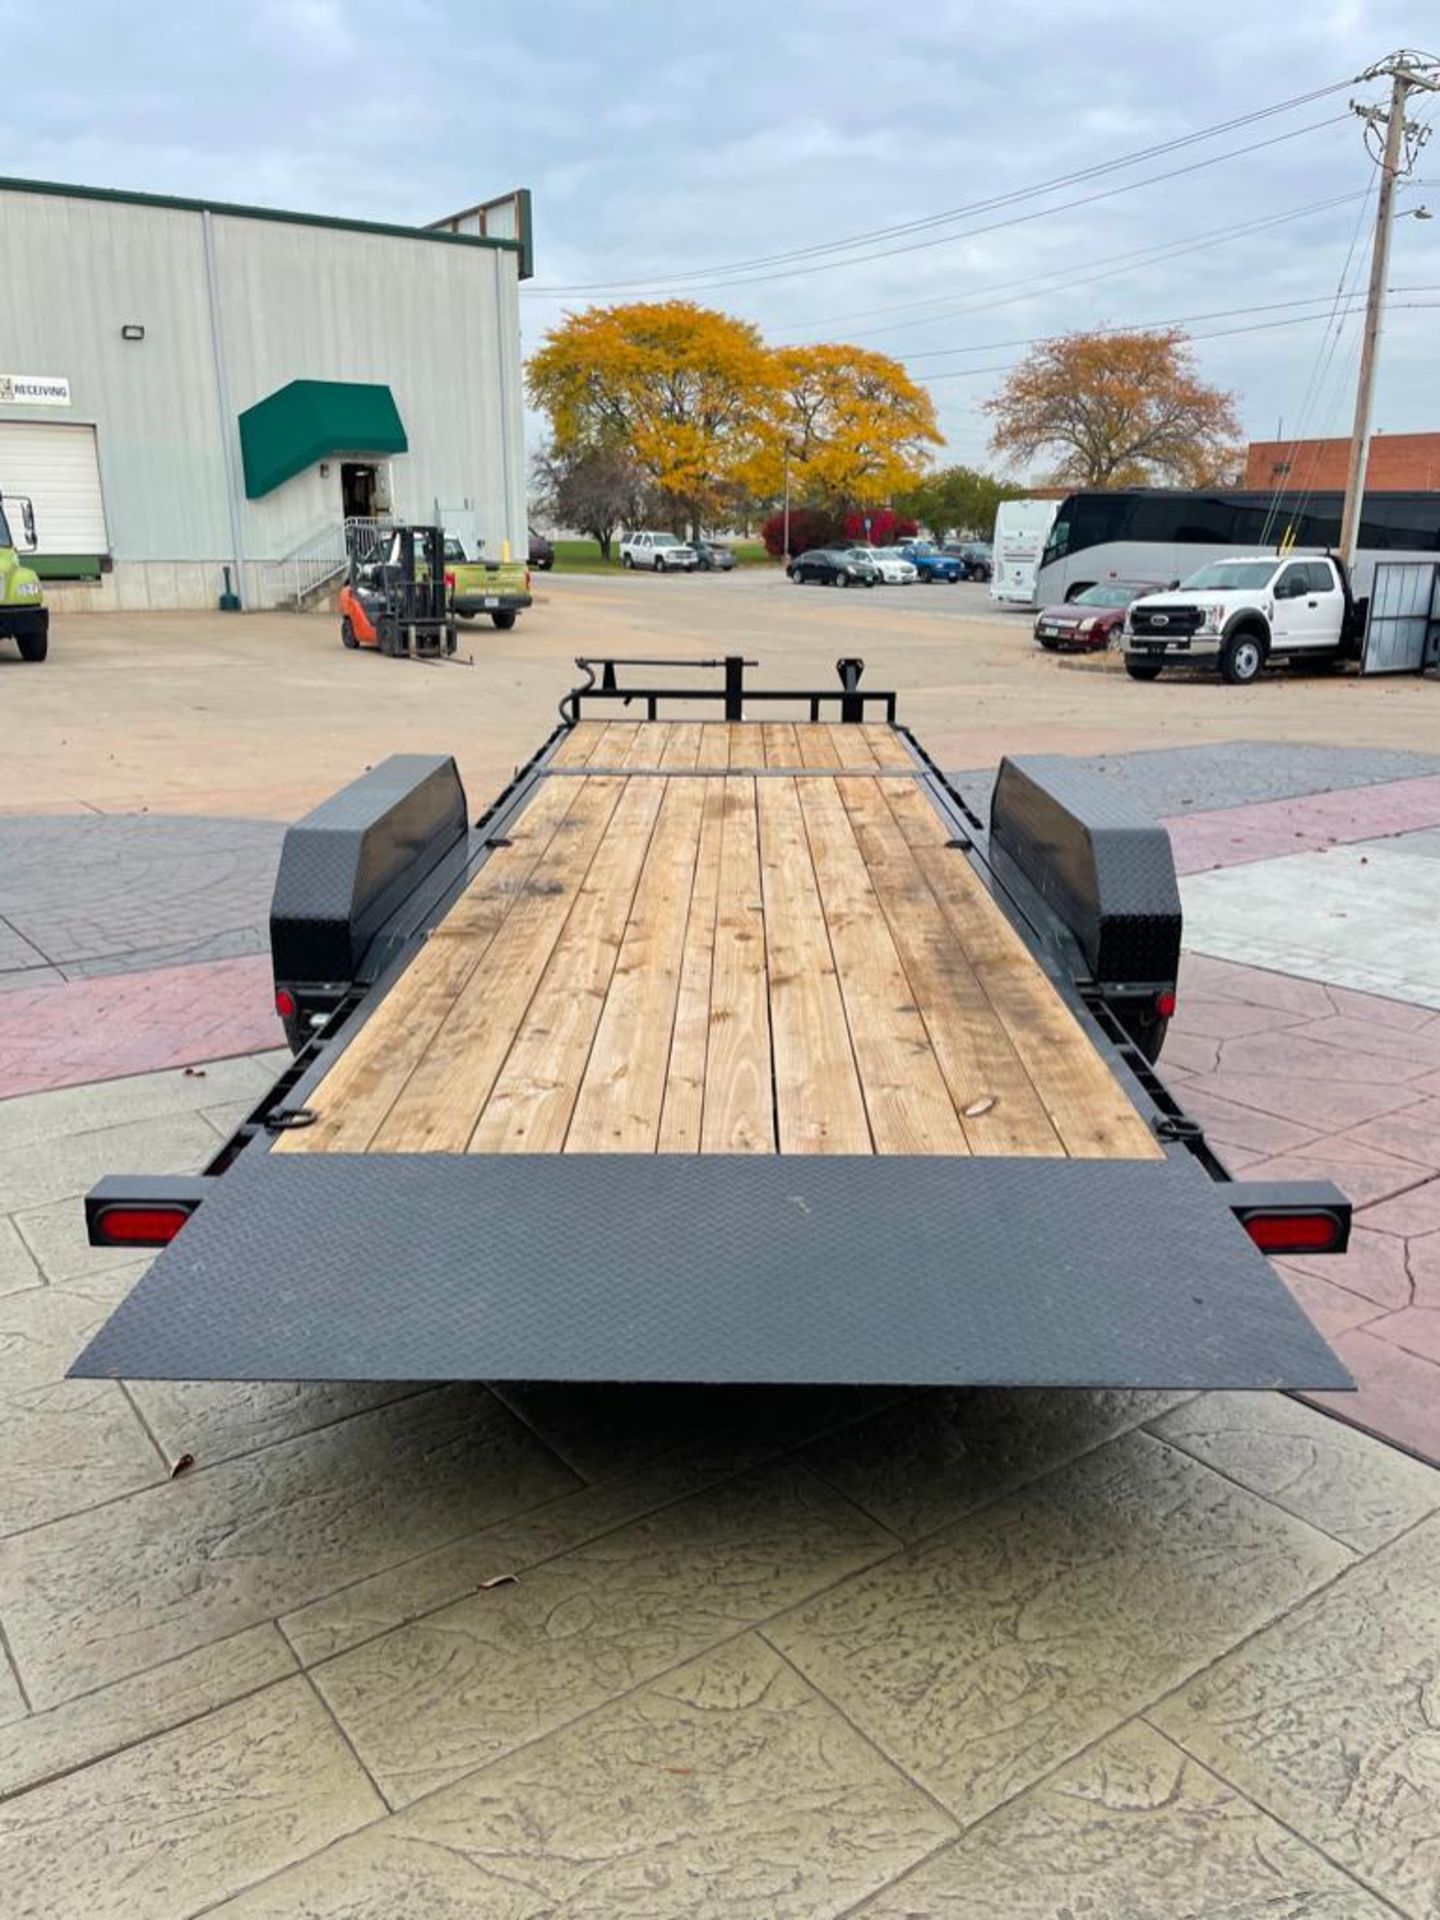 2022 P.J. Trailers Utility Trailer, Vin#4P51C2728N1372160, Pocket Stakes, Power Coated Tough, 14,000 - Image 8 of 20